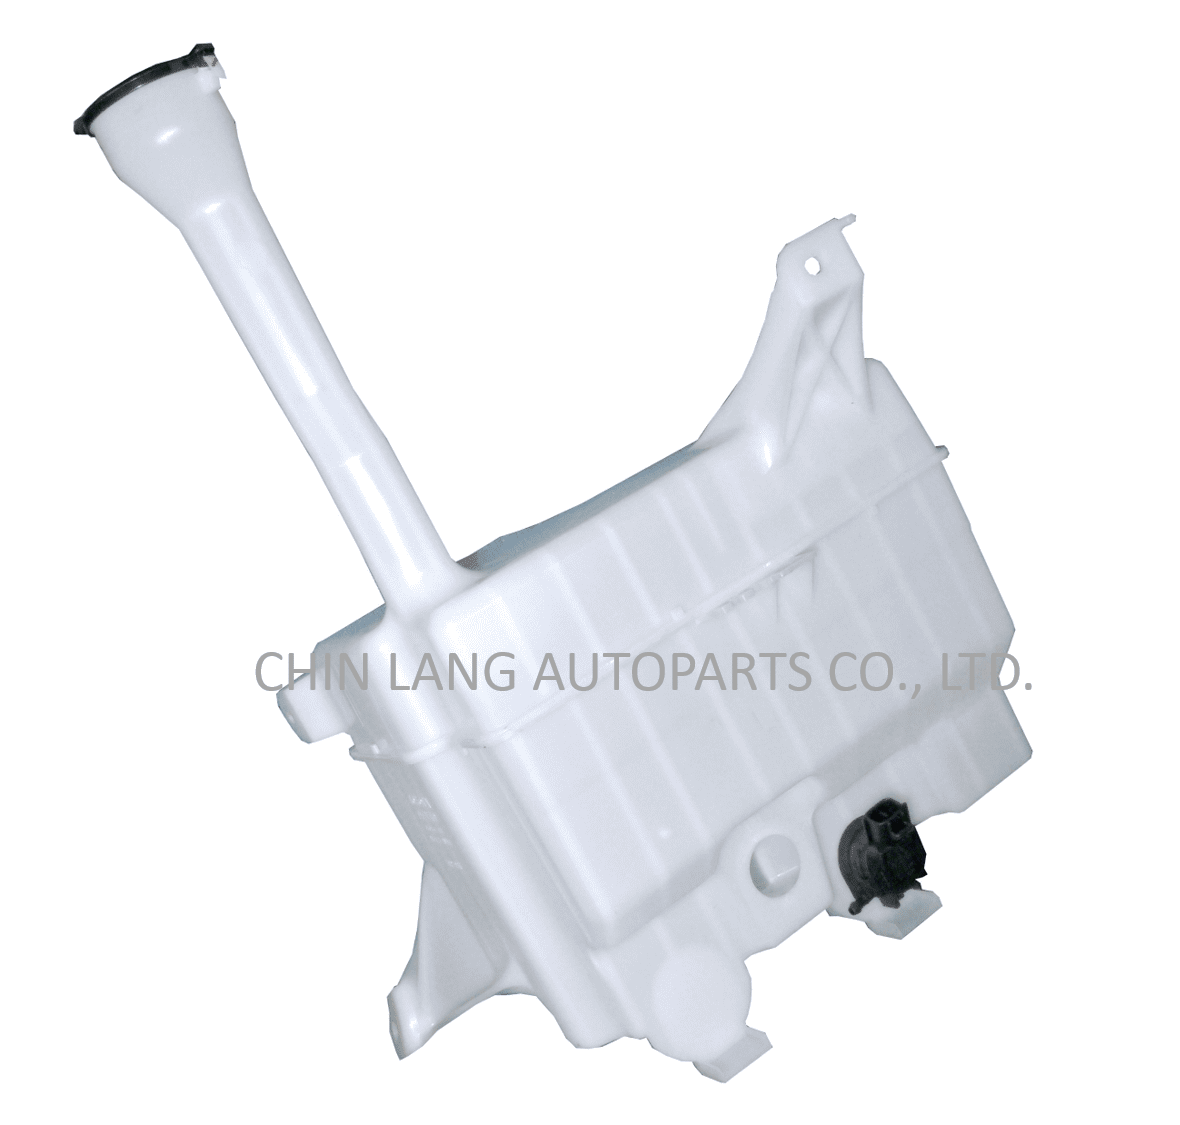 WINDSHIELD WASHER FOR TOYOTA CAMRY ES 2012~ W／SENSOR HOLE雨刷噴水桶-CL-5049D1